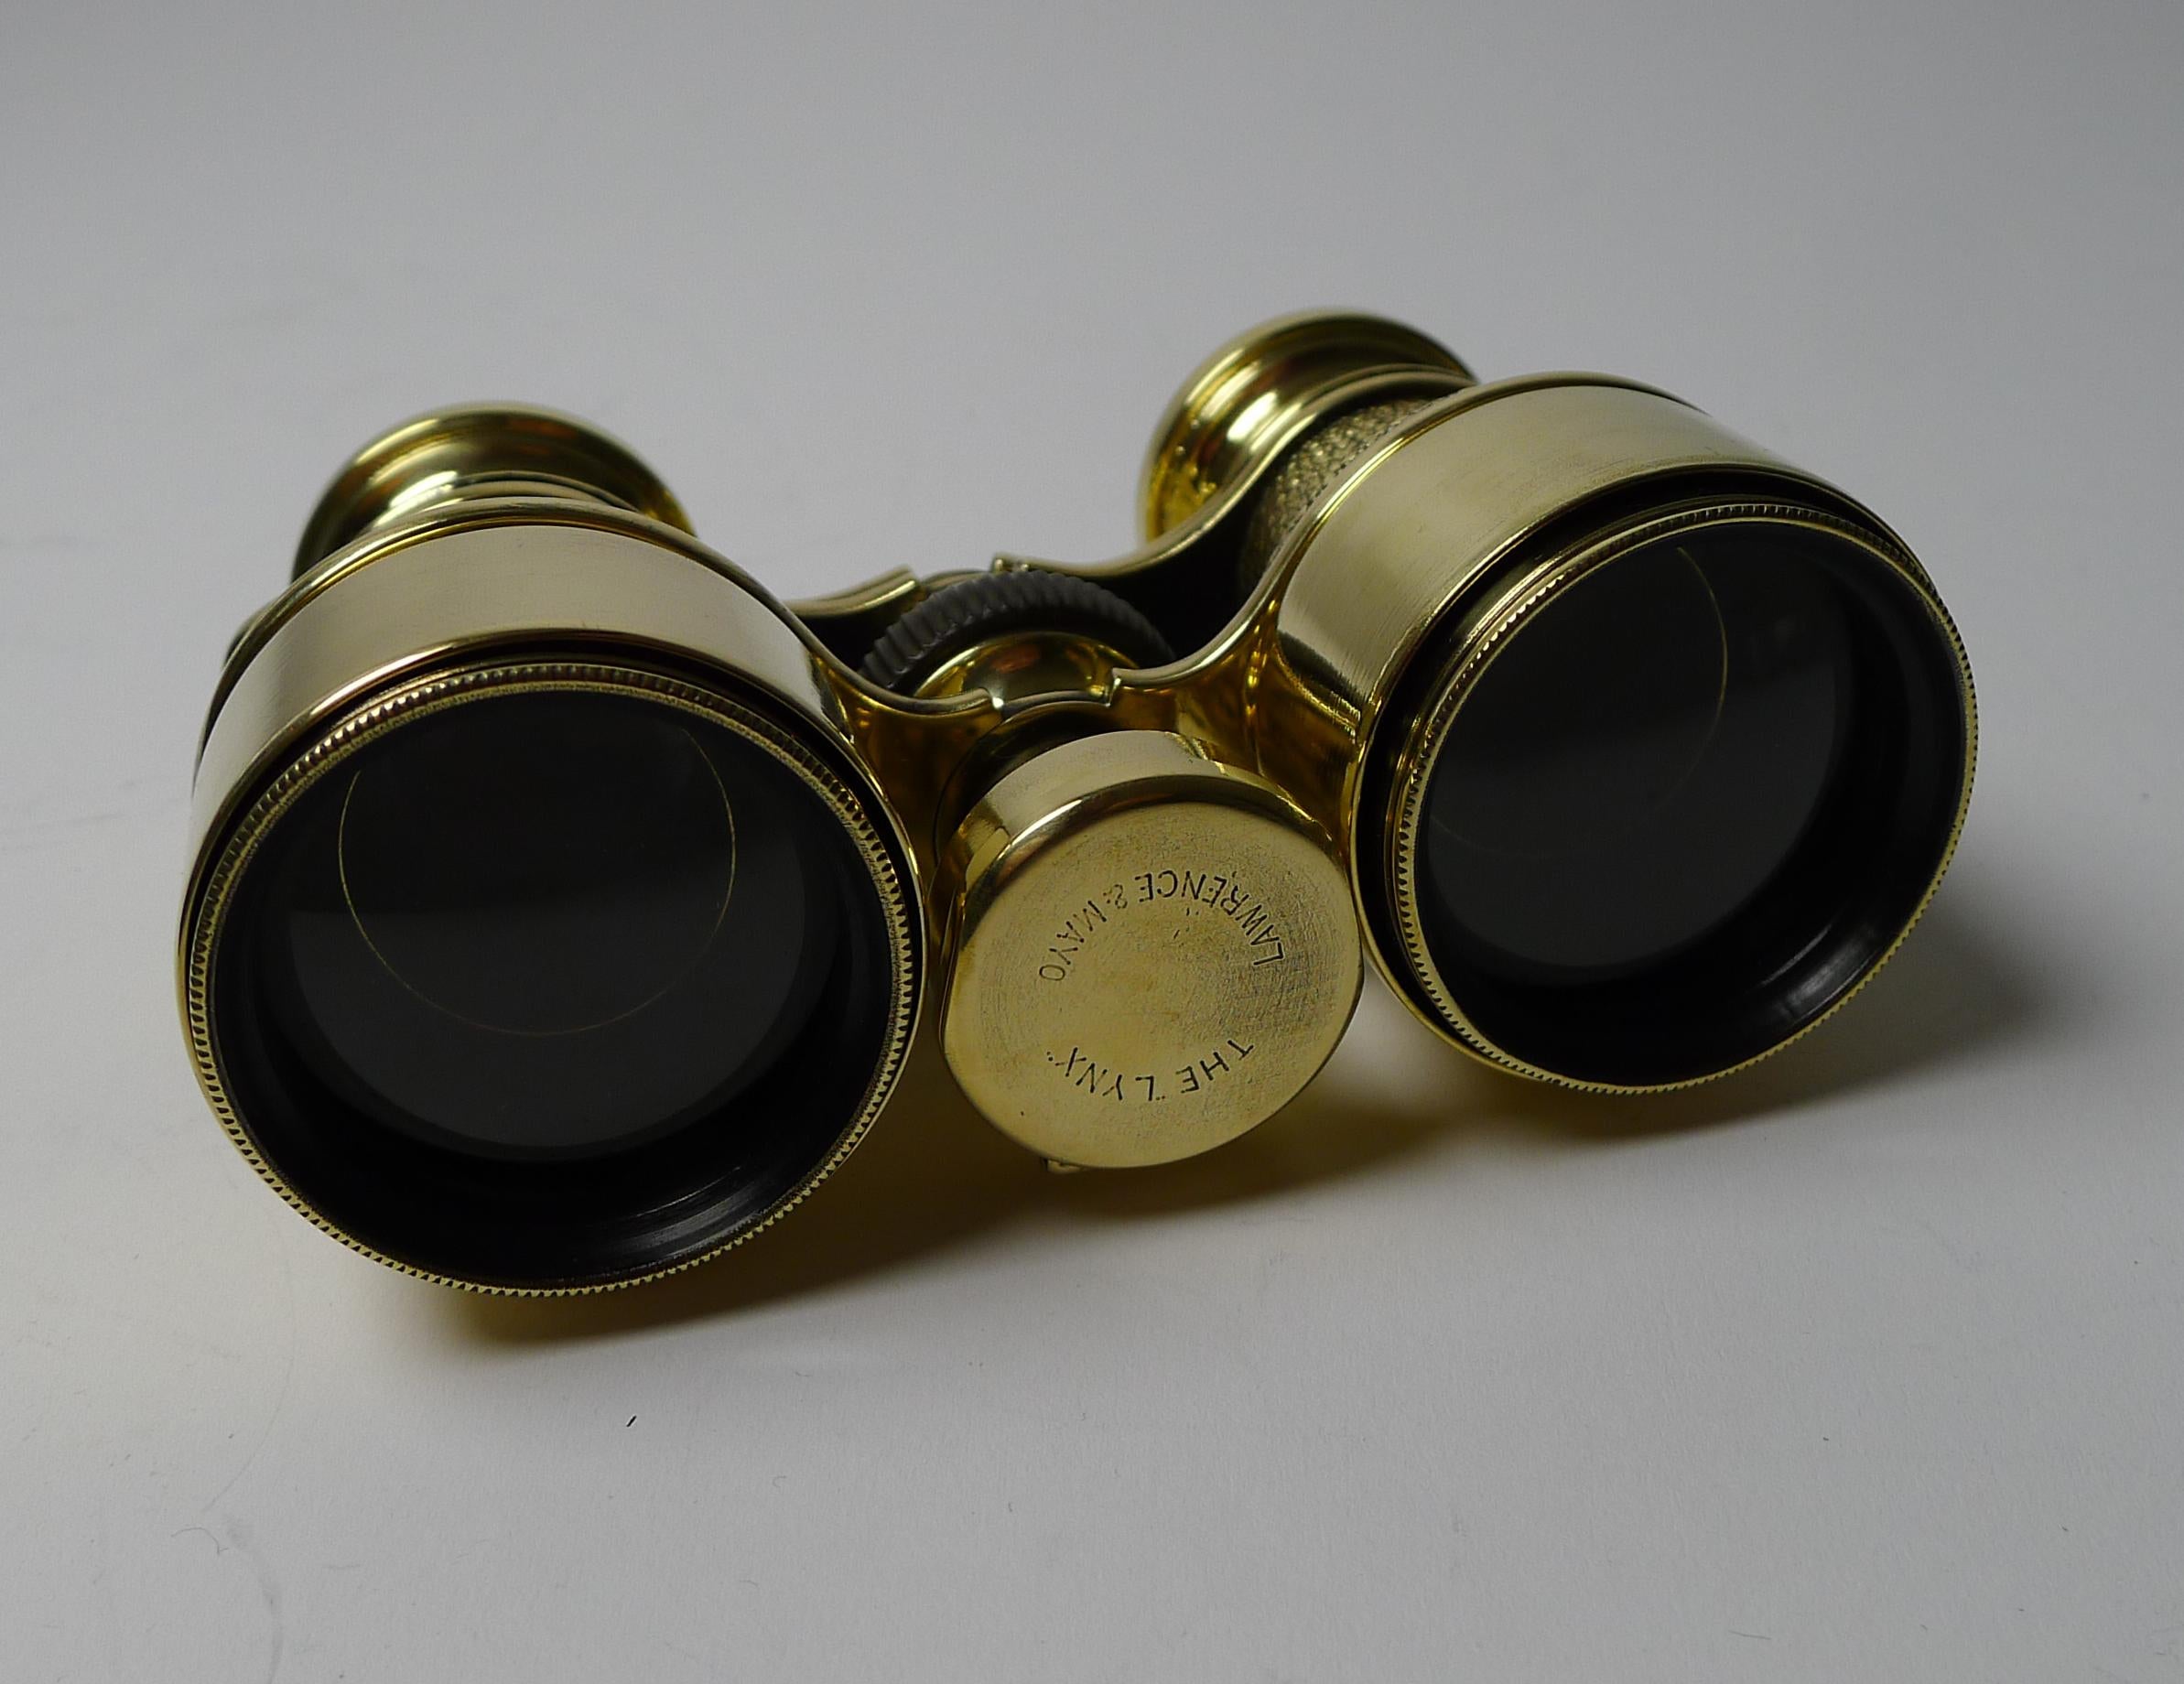 Antique English Field Glasses / Binoculars by Lawrence and Mayo, with Compass 2